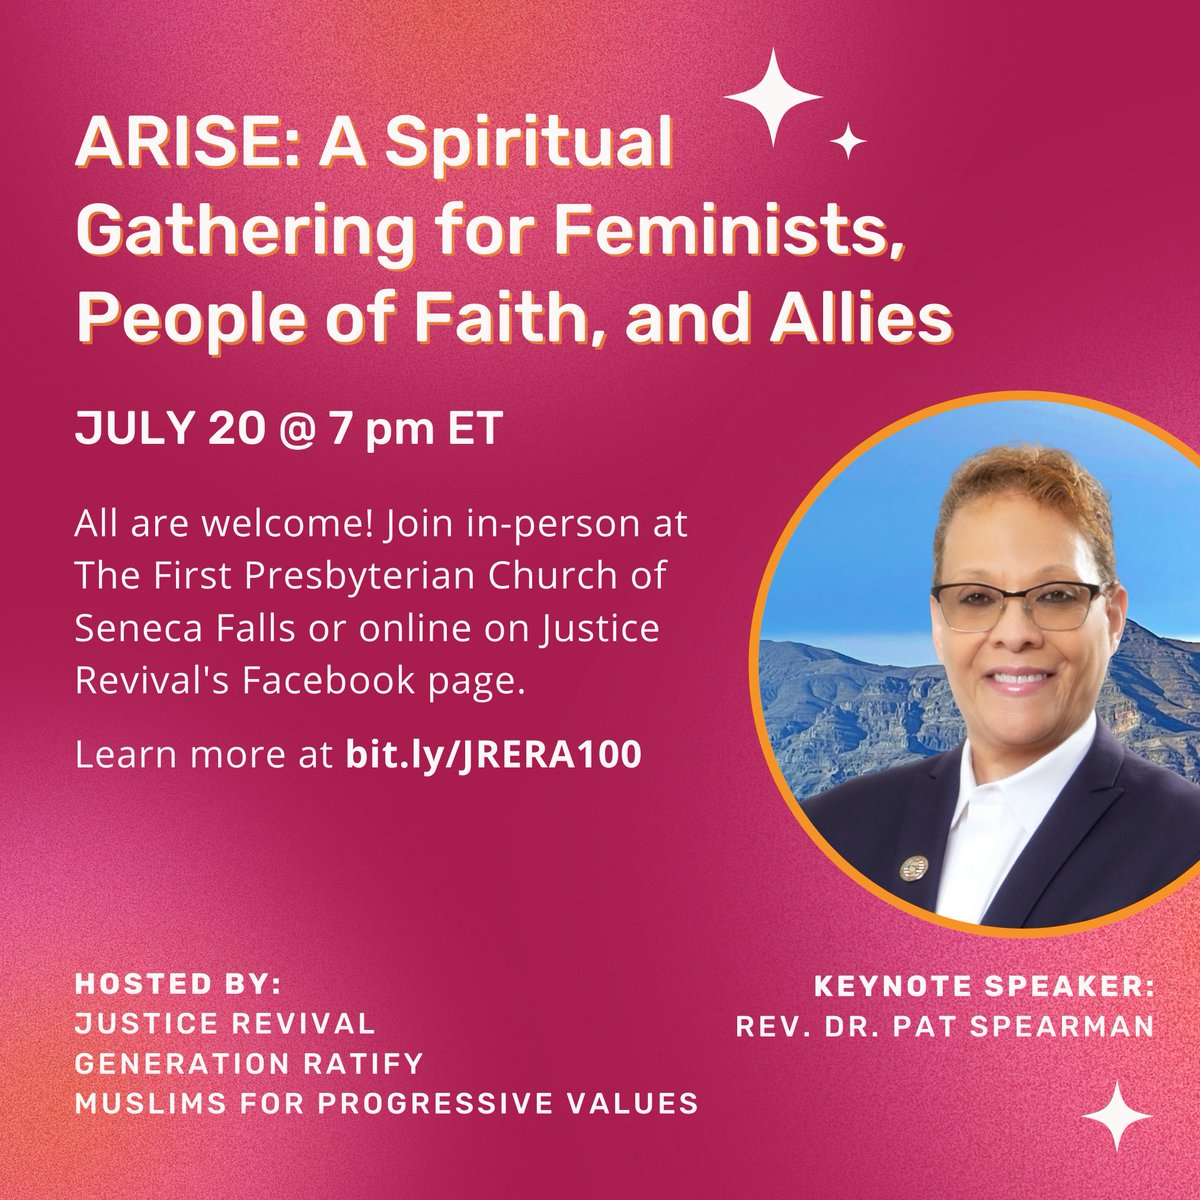 Join us 7/20 at 7 pm ET for an interfaith spiritual gathering marking the 100 year anniversary of the Equal Rights Amendment!

We’ll reflect, build community, nurture our spirits, and recommit to the cause of equality for all.

Details: bit.ly/JRERA100 #Faith4ERA #ERANow